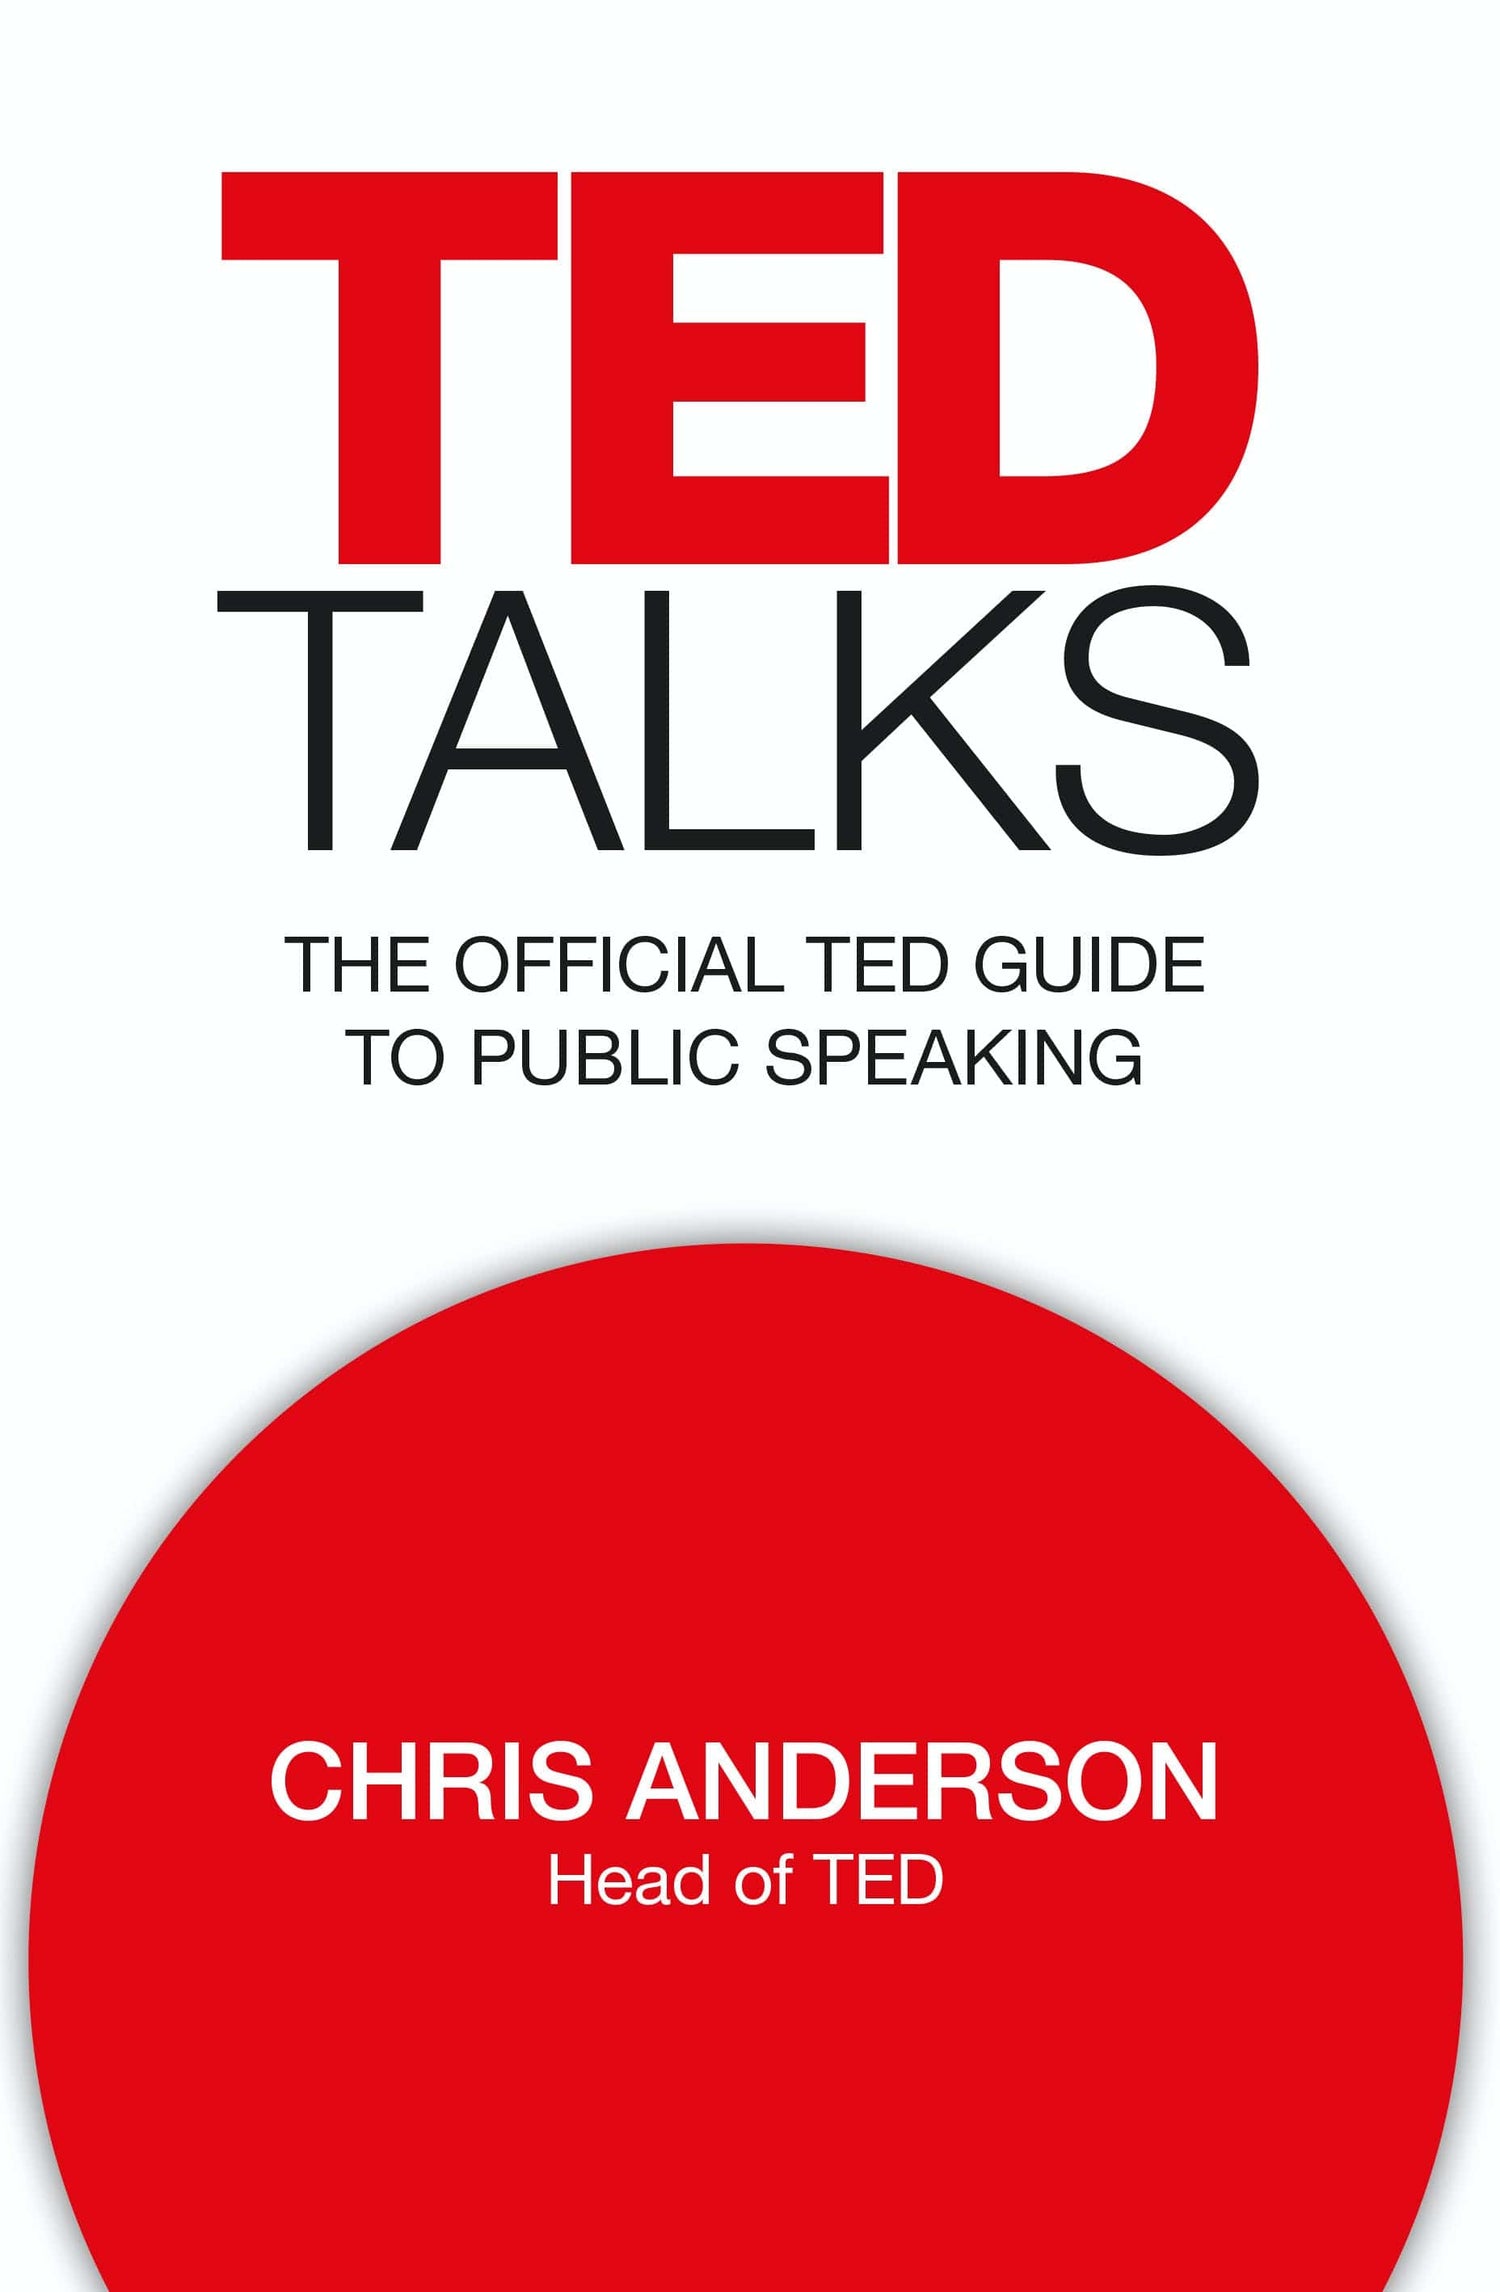 TED TALKS : THE OFFICIAL TED GUIDE TO PUBLIC SPEAKING: TIPS AND TRICKS FOR GIVING UNFORGETTABLE SPEECHES AND PRESENTATIONS